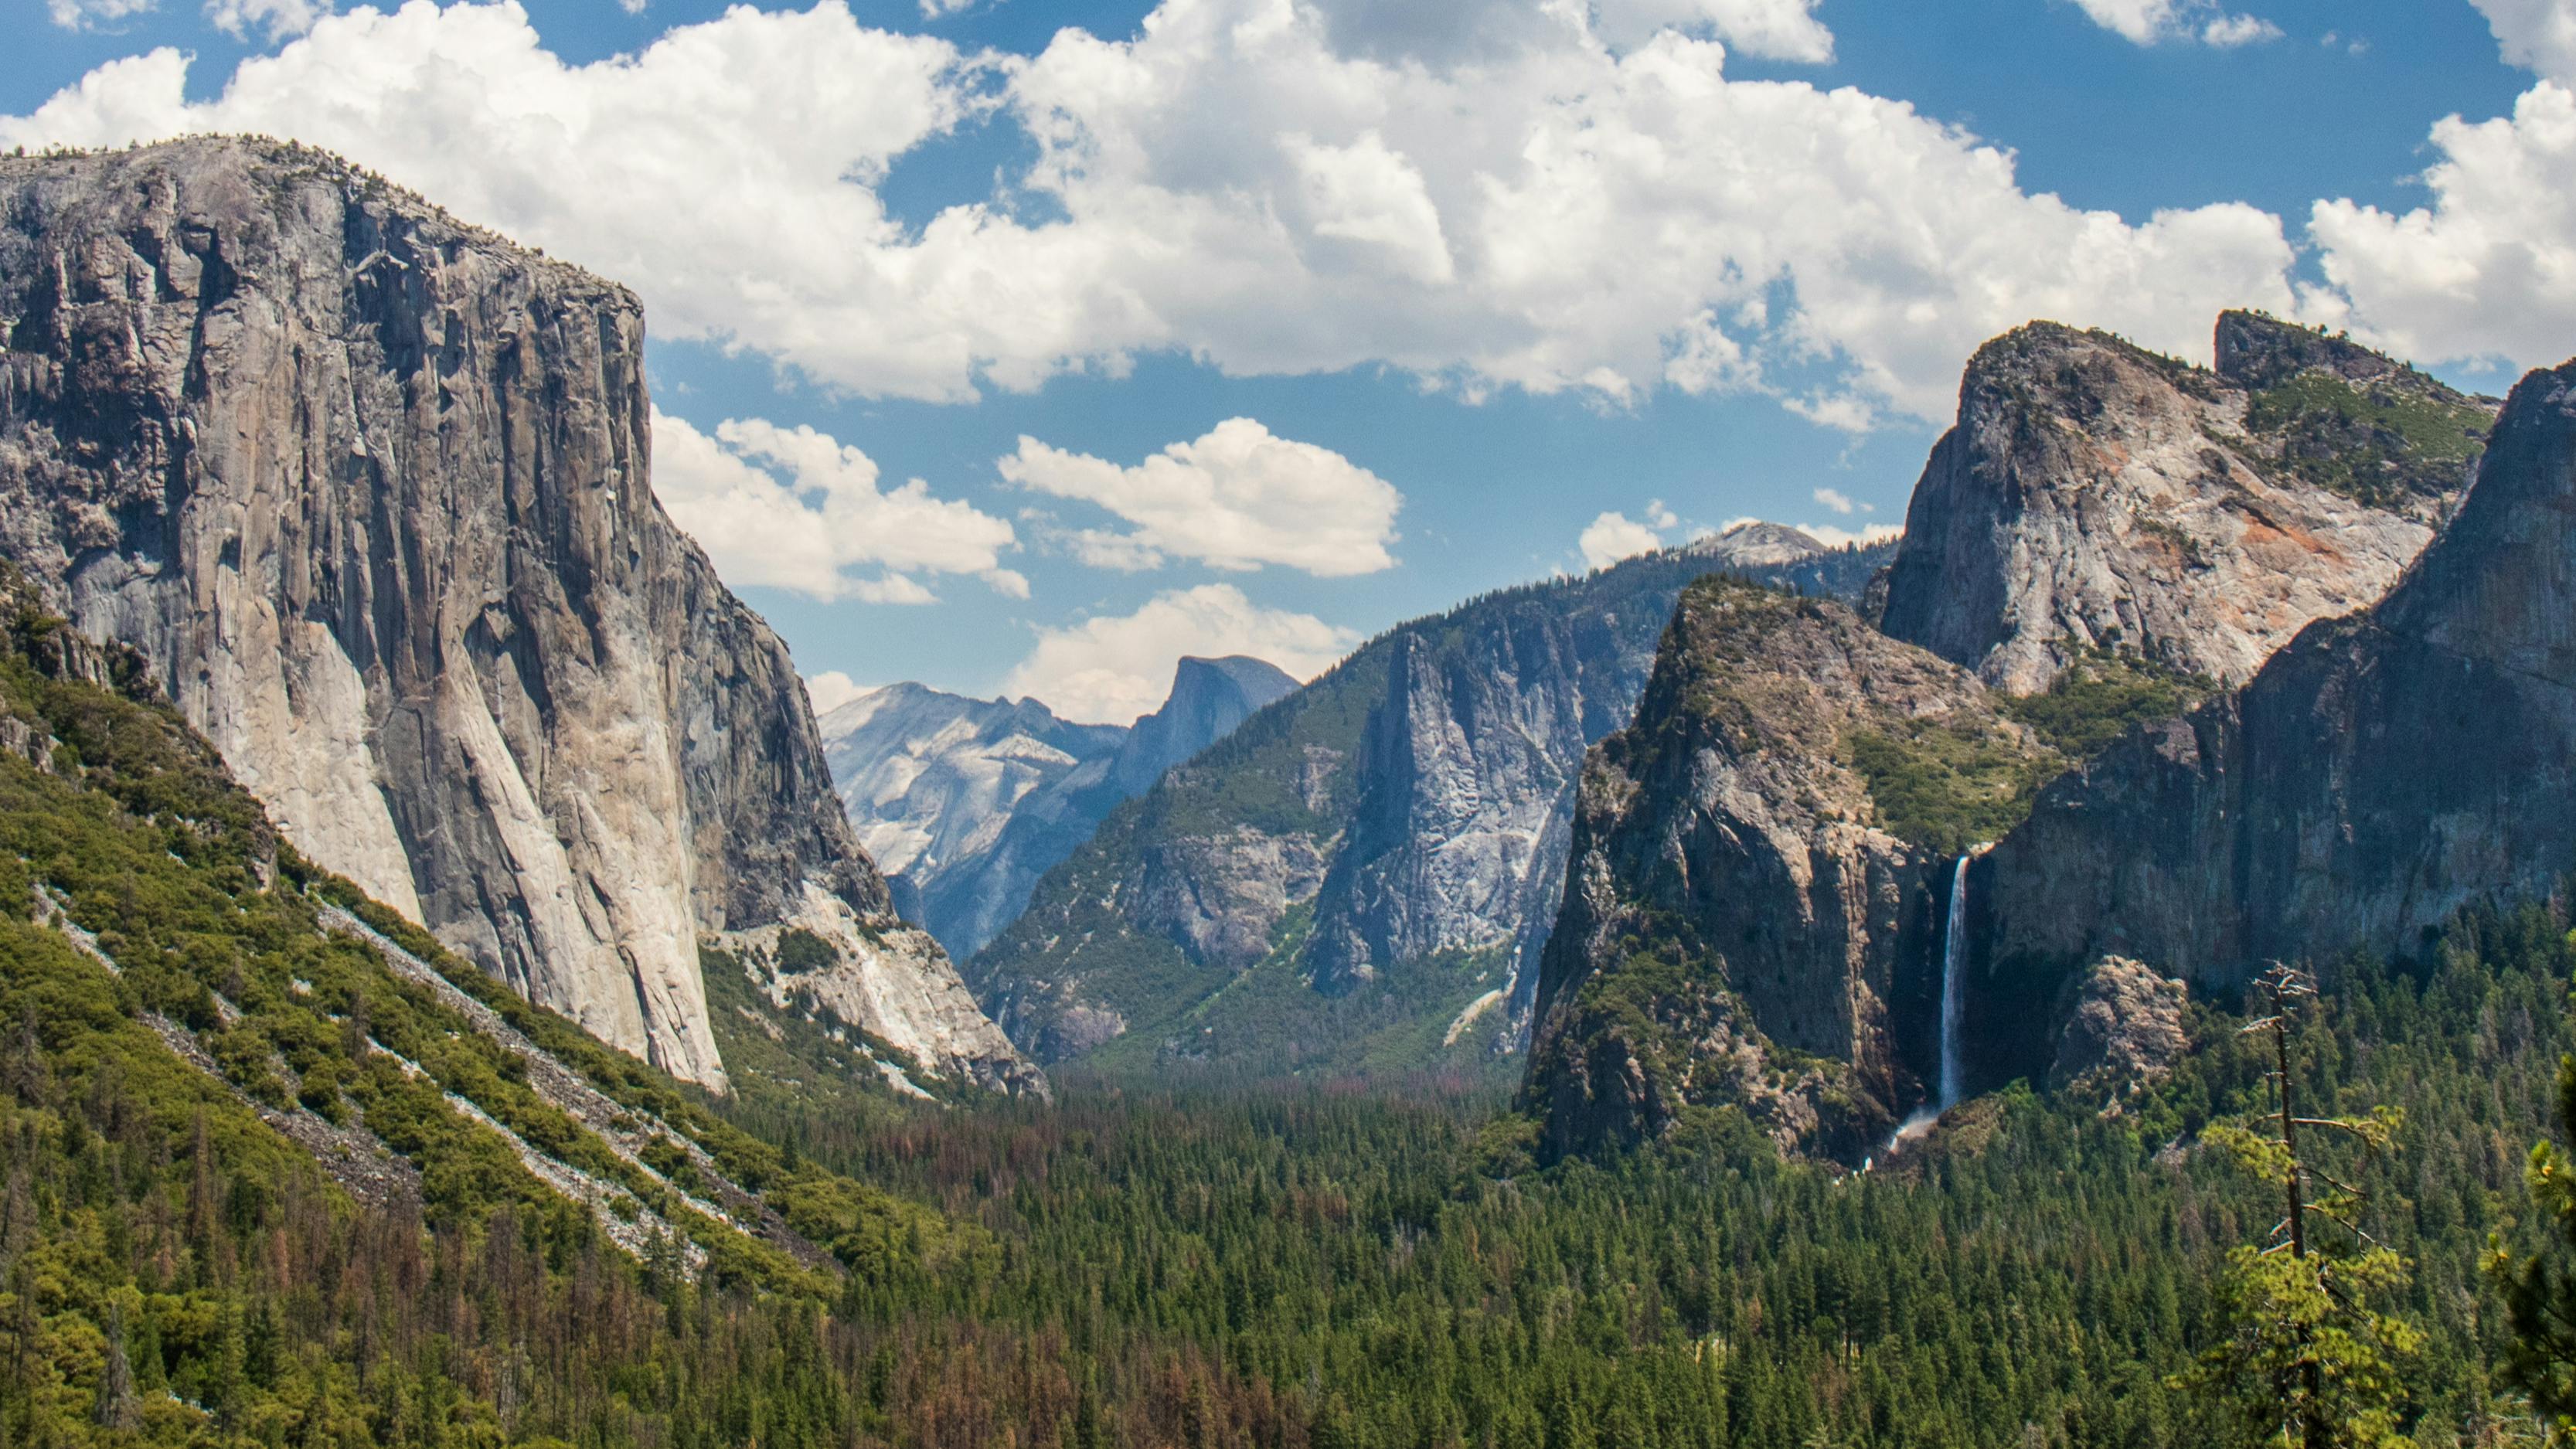 The famous Tunnel View of Yosemite National Park with Half Dome and a waterfall visible on the right side. The landscape is green and lush and the sky above is pale blue with puffy white clouds.